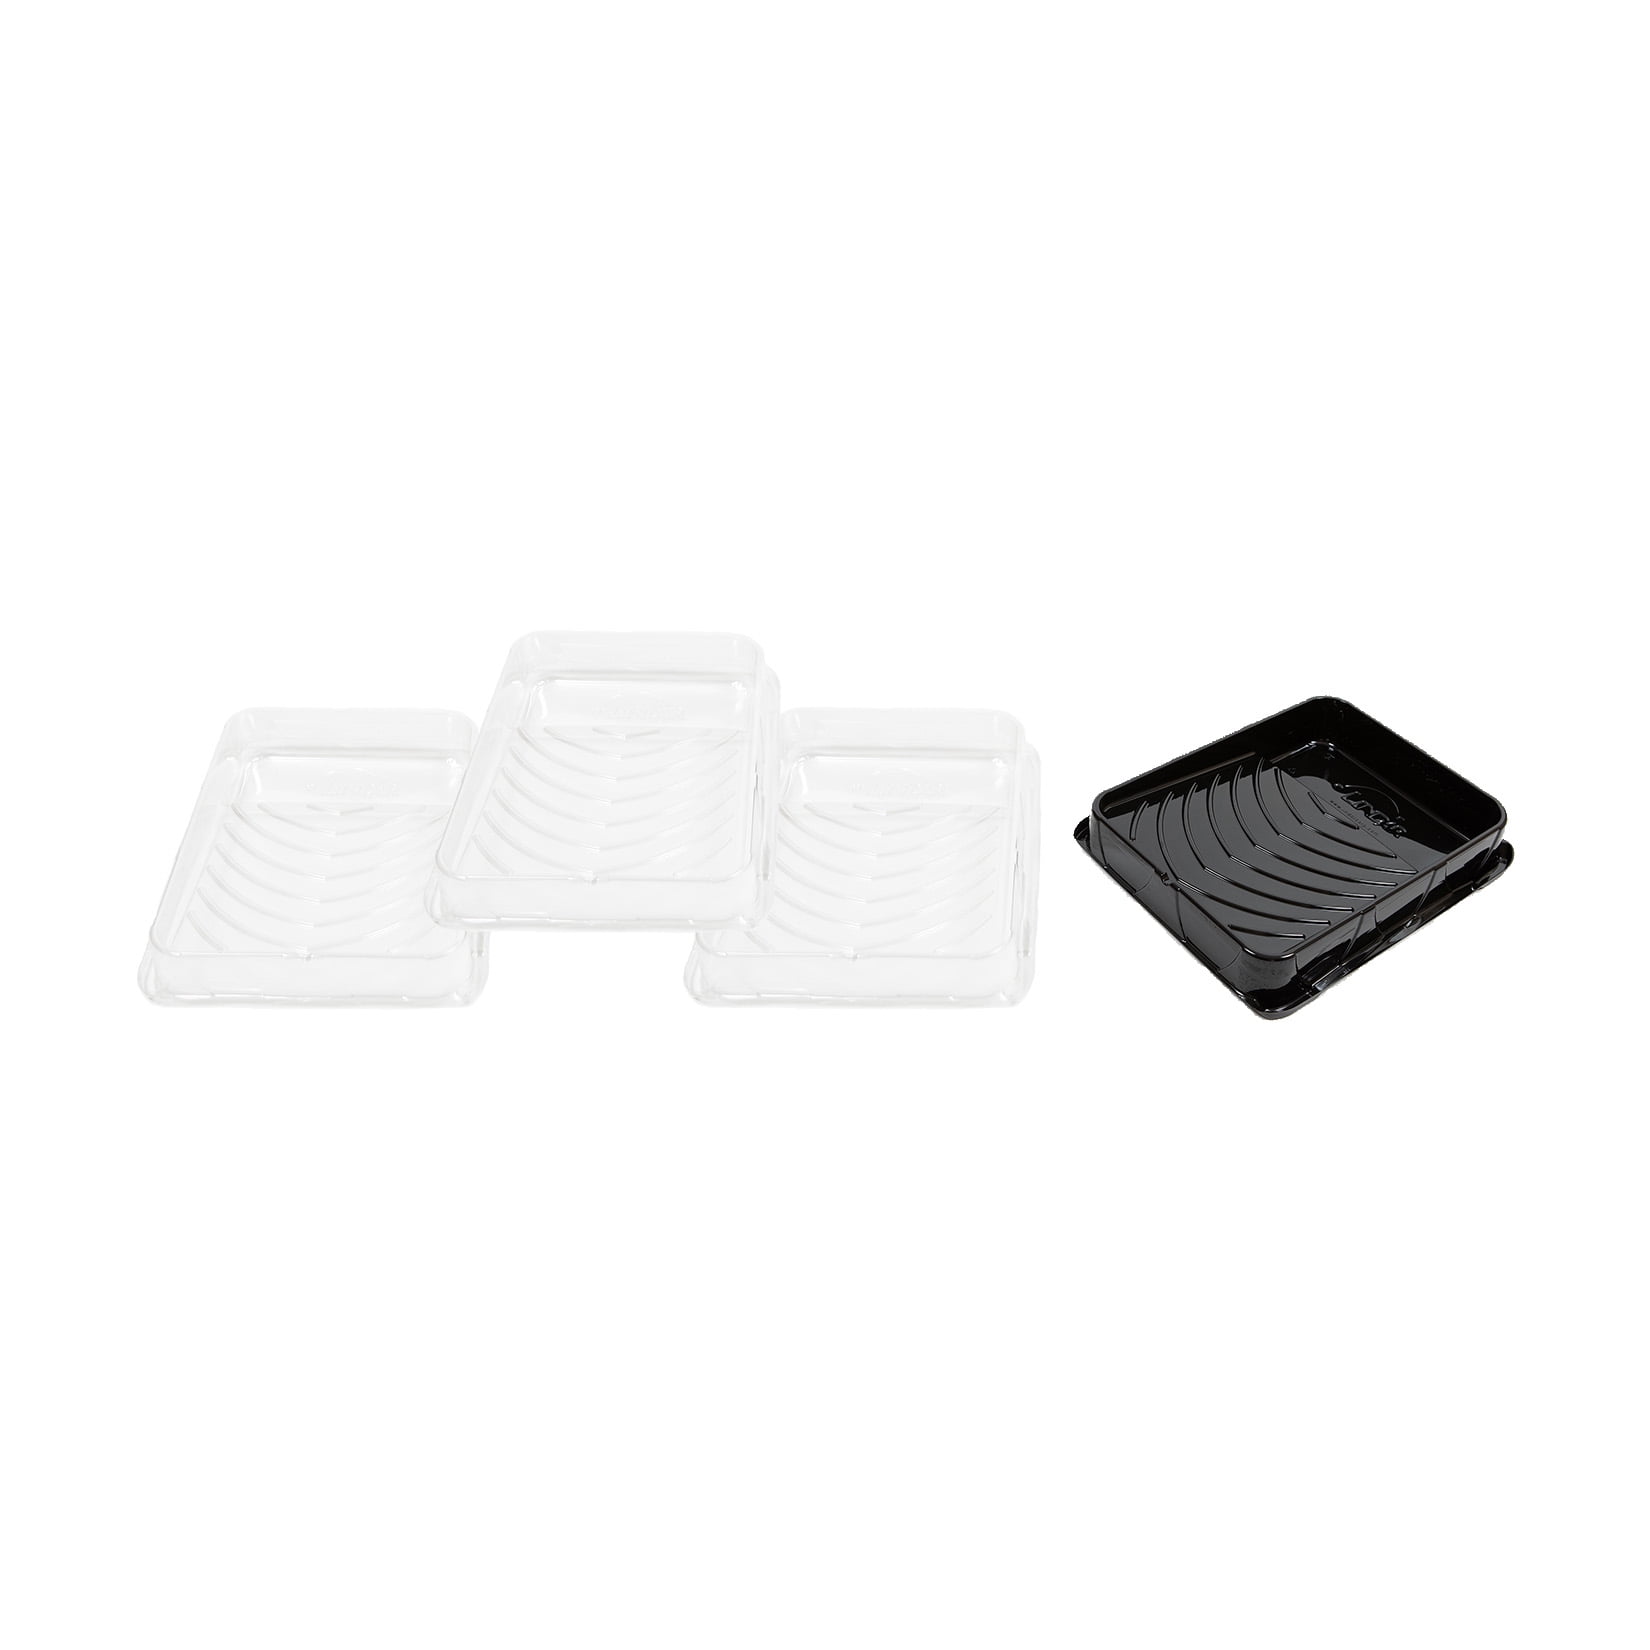 Paintwell 1 Tray + 3 Liner 9in Project Pack, Size: 9 inch